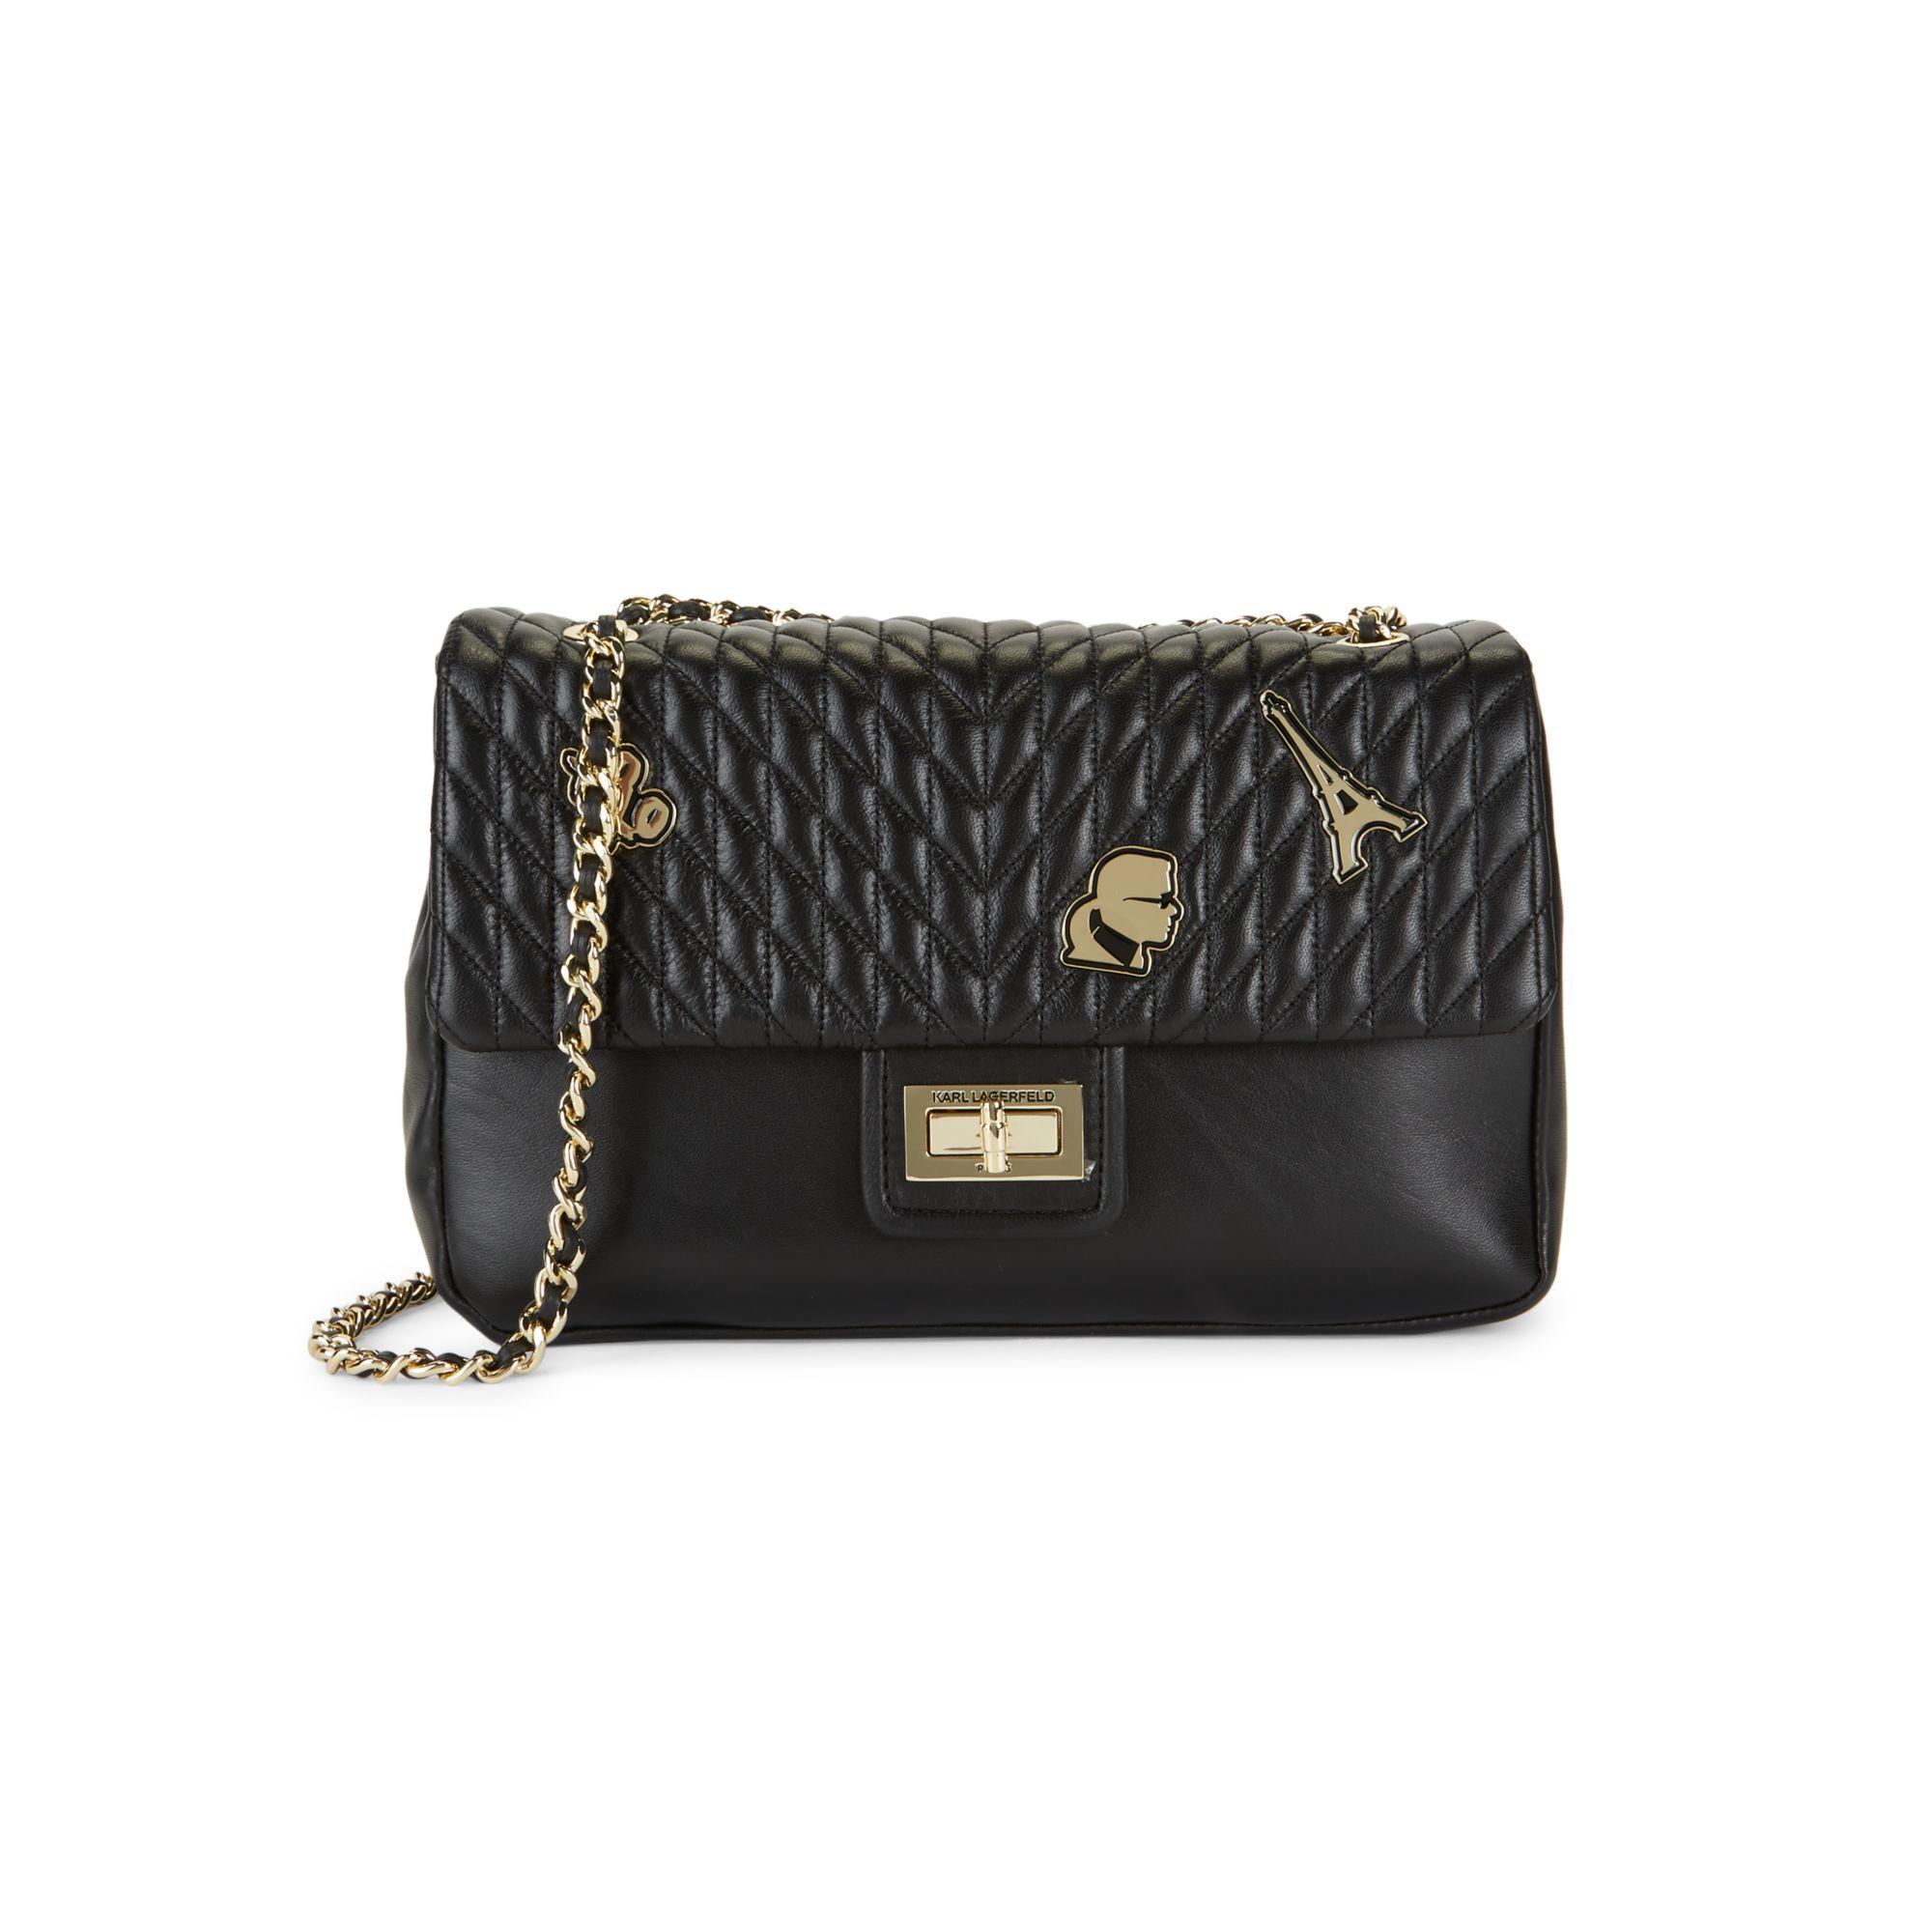 Karl Lagerfeld Agyness Quilted Leather Shoulder Bag in Black - Lyst